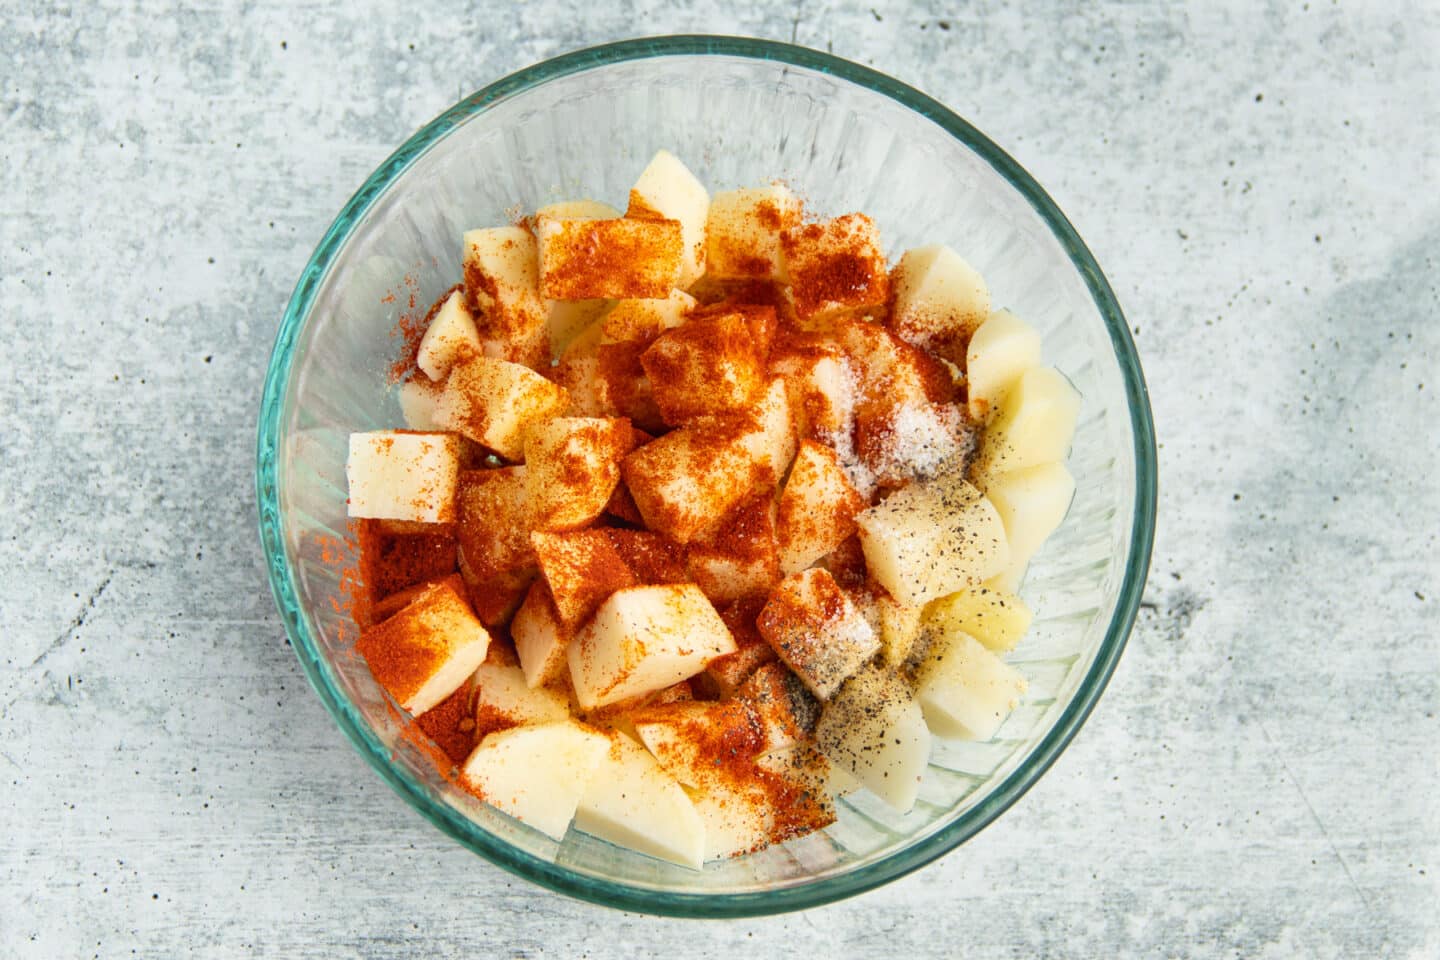 Picture of a bowl with diced potatoes and spices on top.